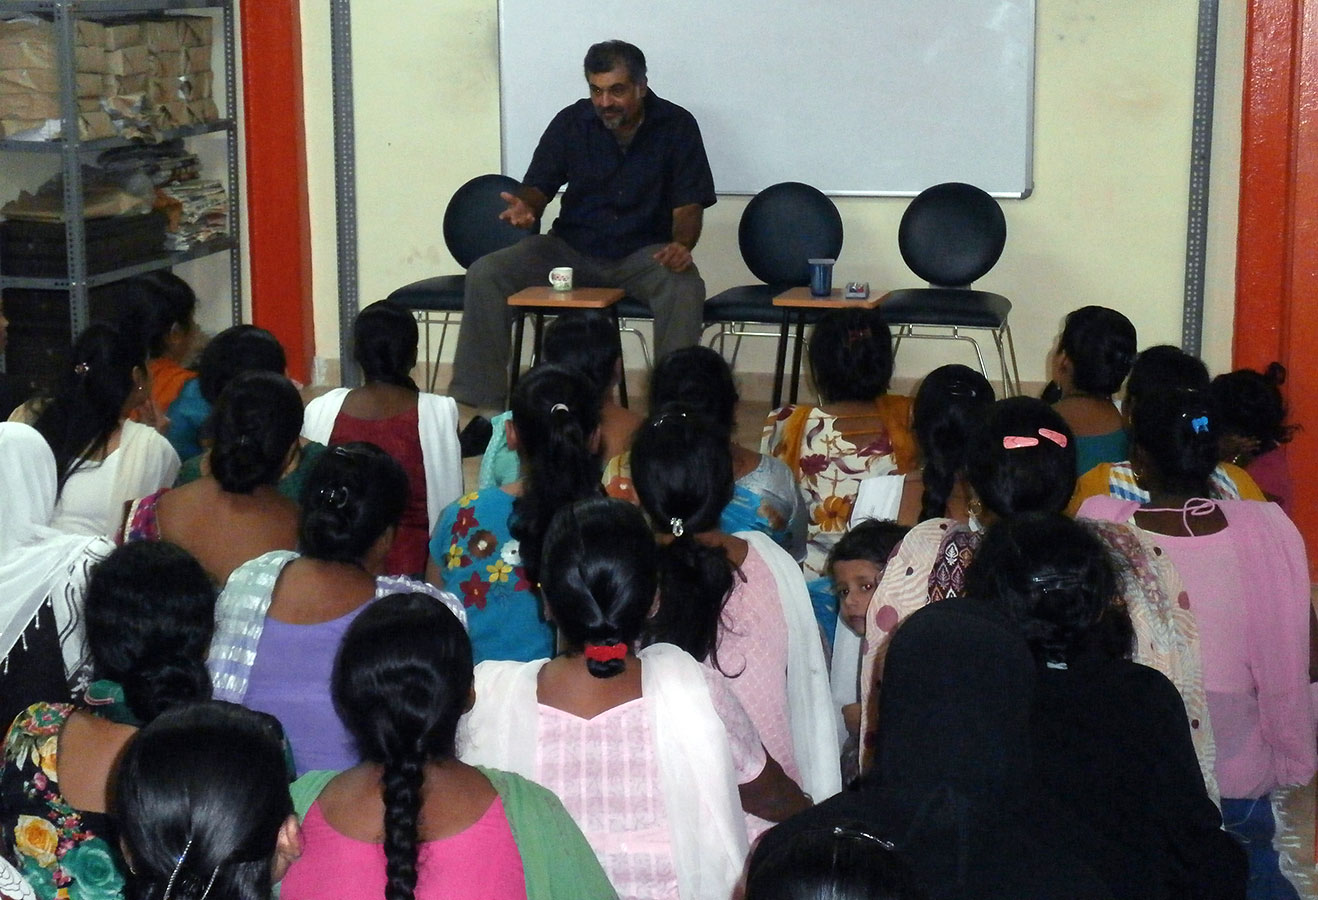 Beneficiaries seen involved in Chalo Tension ko Maarein Goli, a session that  teaches how to deal with tensions and push stress away (September, 2012)